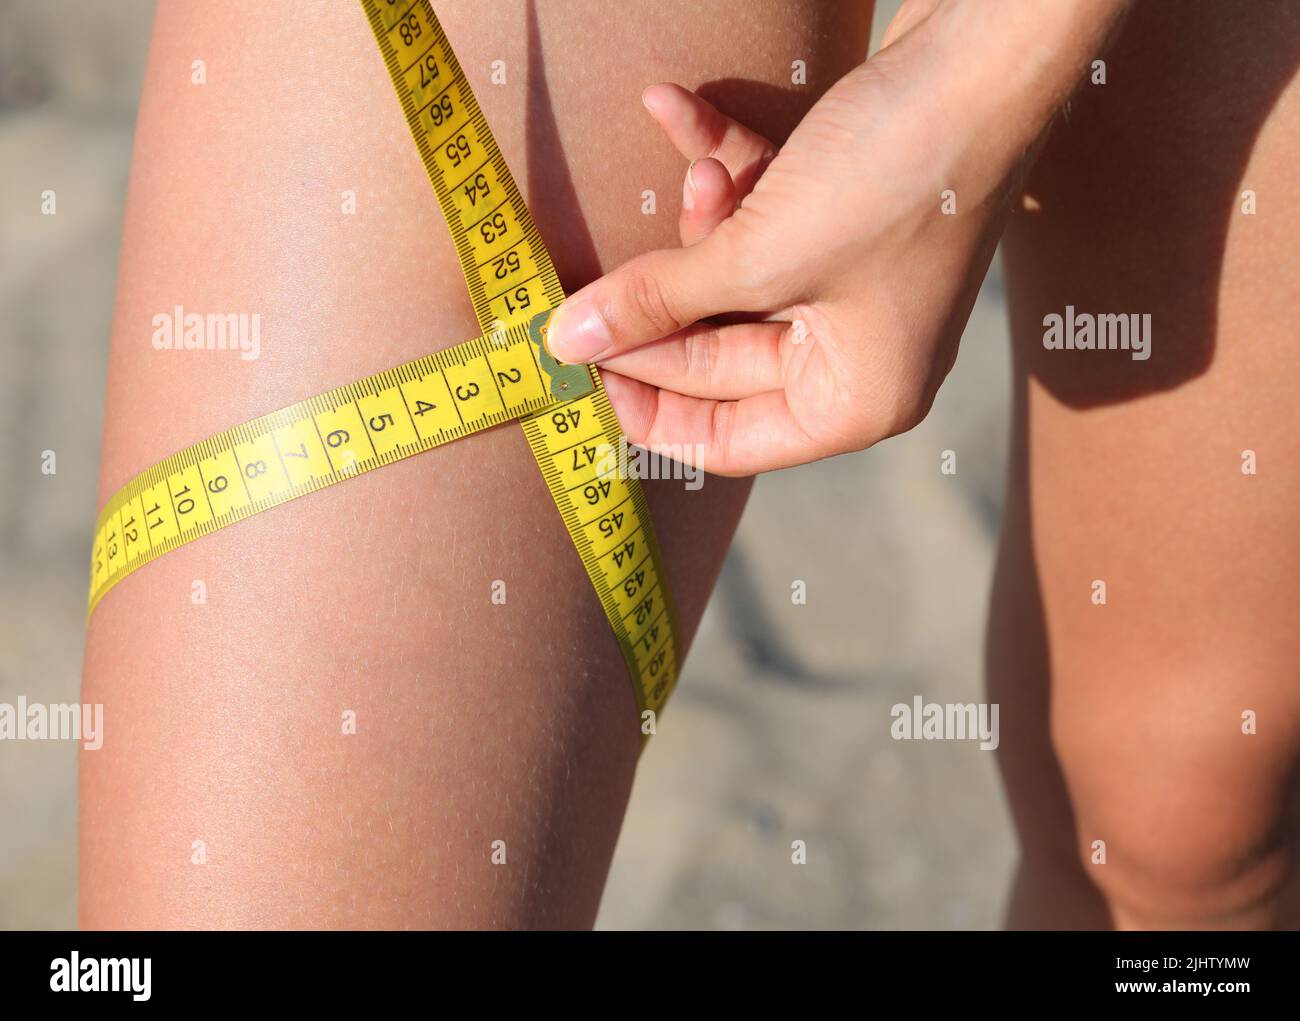 thigh of the young girl while measuring the circumference with a tape meter Stock Photo